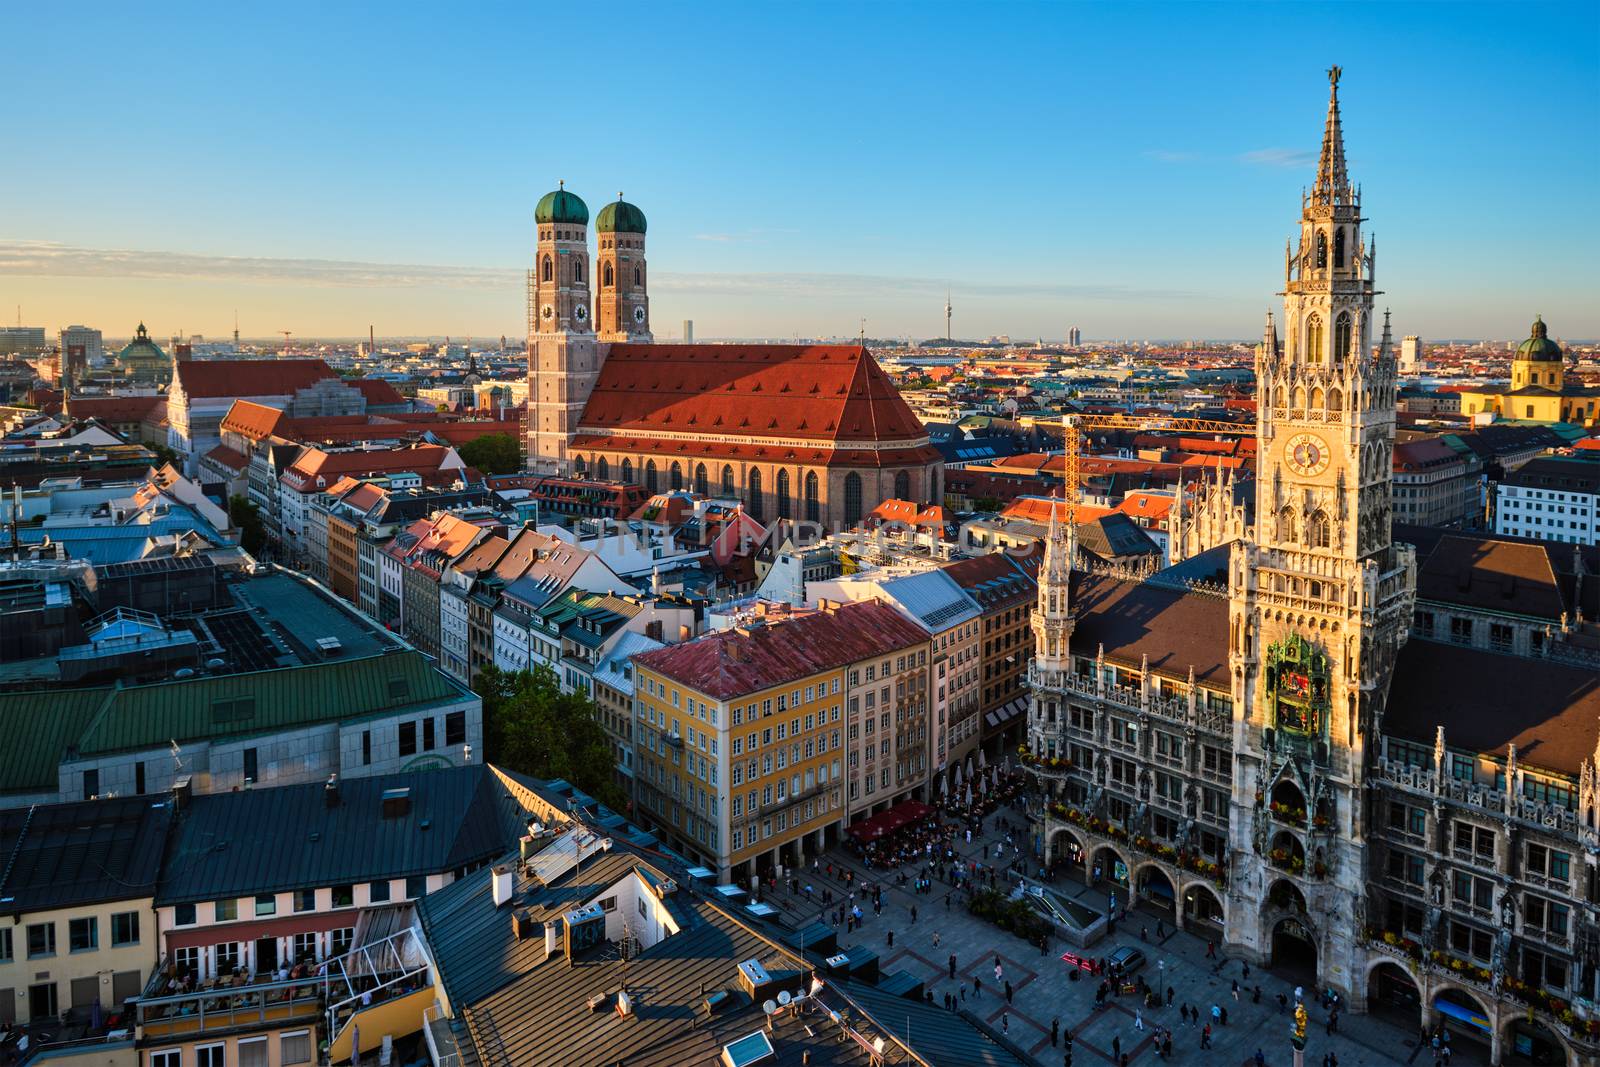 Aerial view of Munich, Germany by dimol